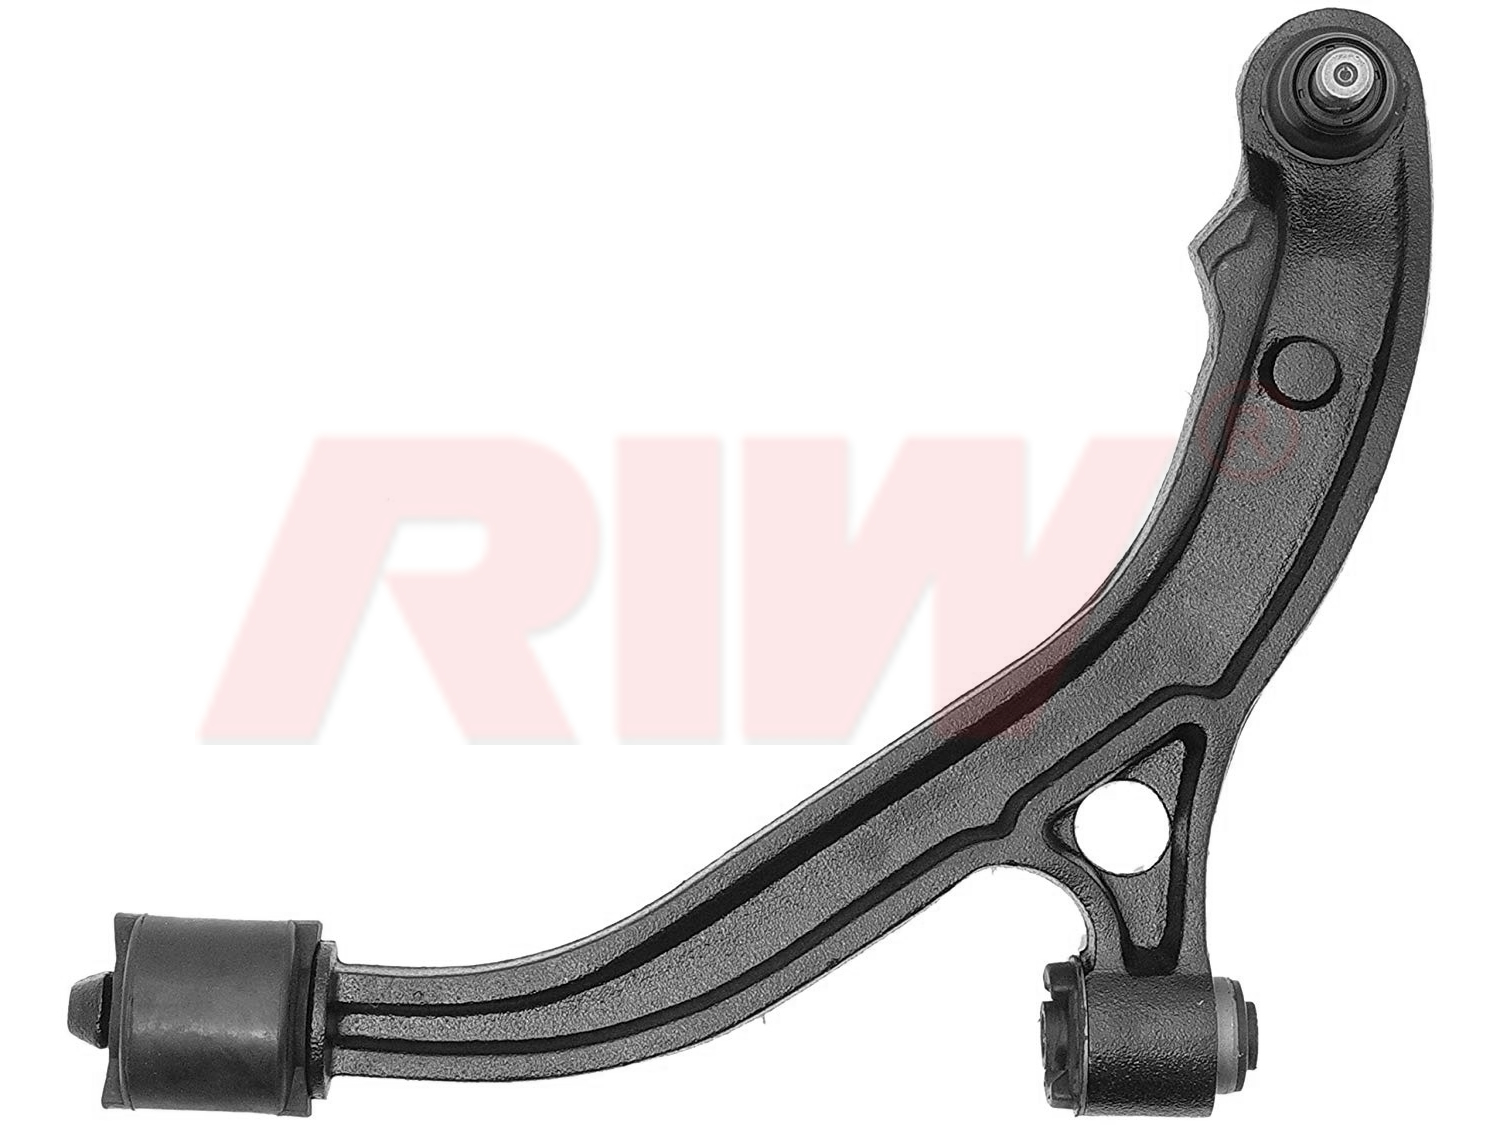 PLYMOUTH GRAND VOYAGER 1995 - 2001 Control Arm